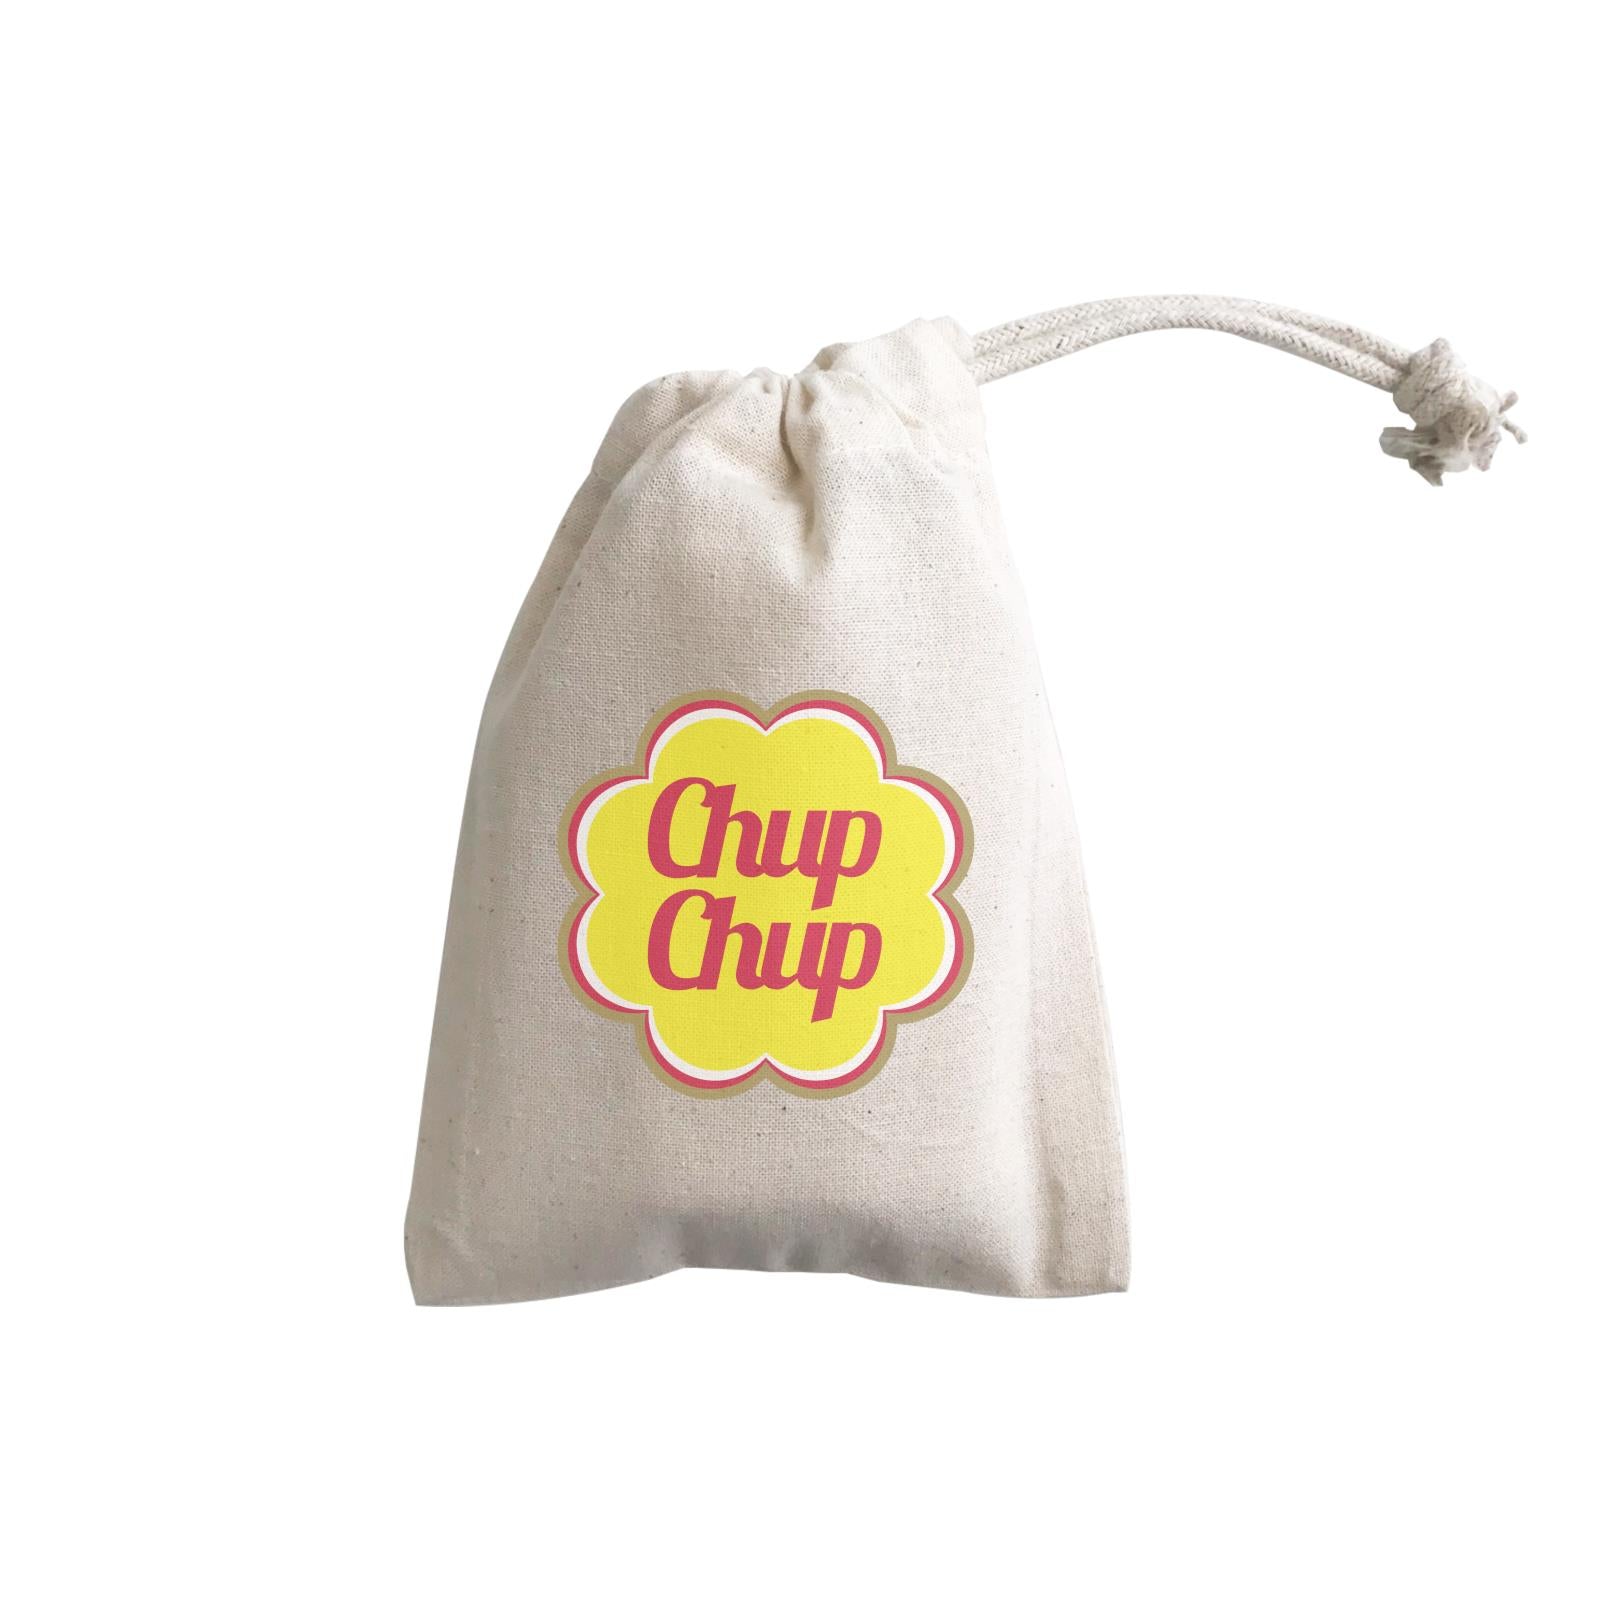 Slang Statement Chup Chup GP Gift Pouch